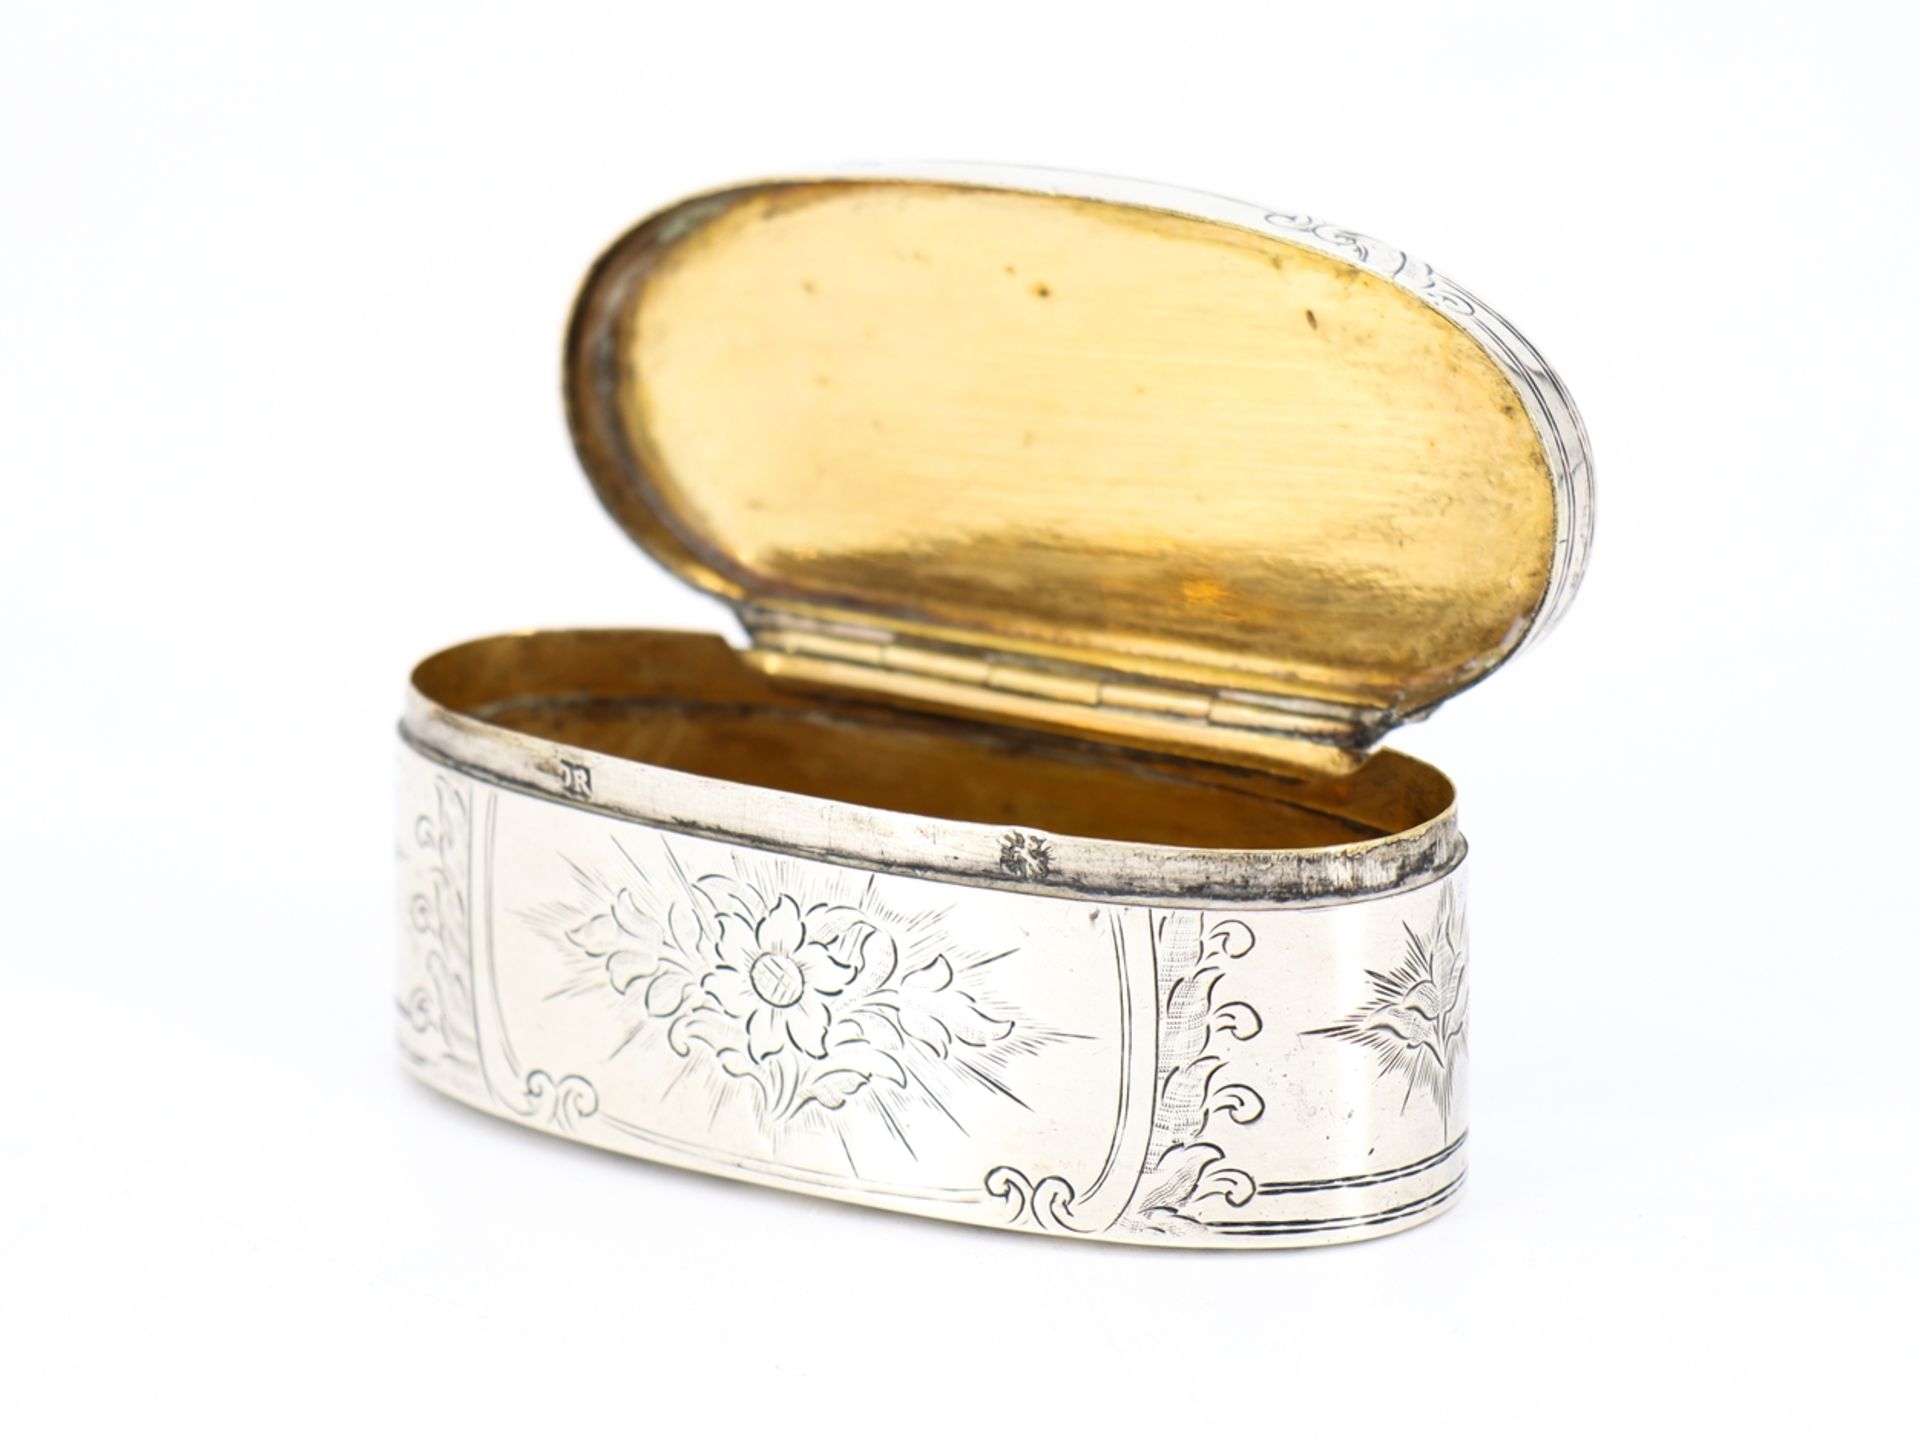 Tabatiere silver gilded inside, end of 18th c. - Image 10 of 10